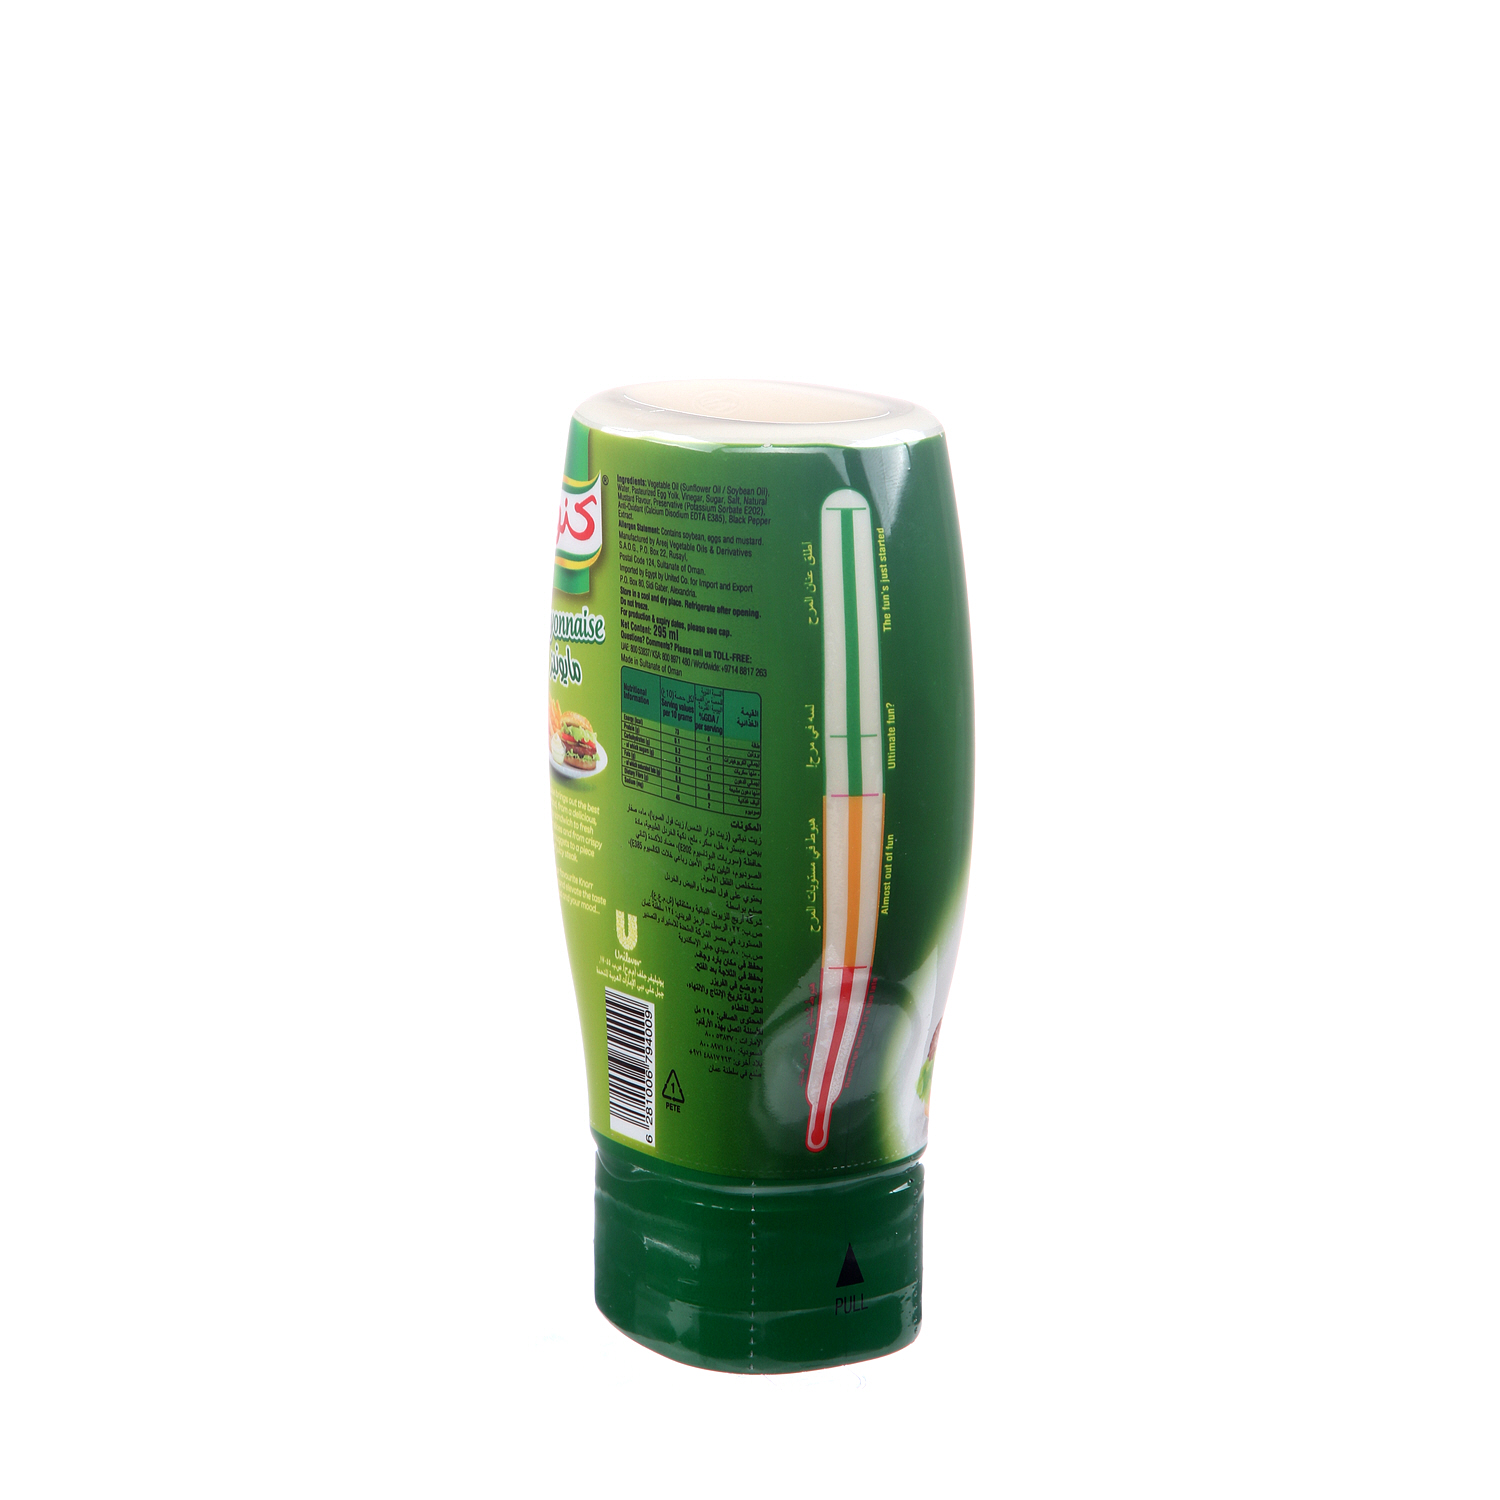 Knorr Real Mayonnaise Plastic Bottle 295ml